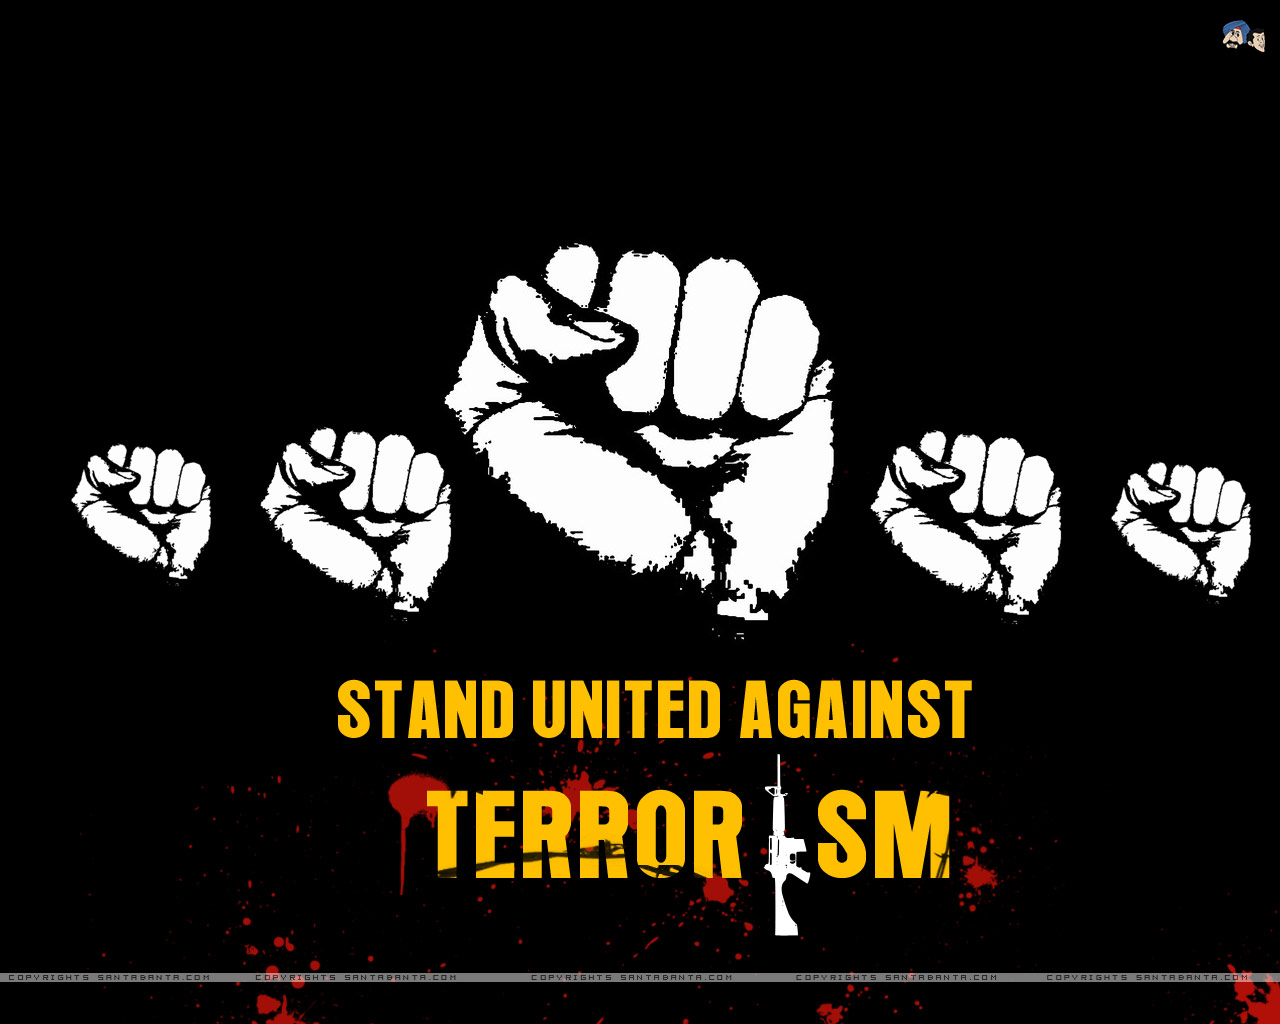 Against the day. Anti terrorism. United Stand. Terrorism pictures. International Anti terrorism Day banner.